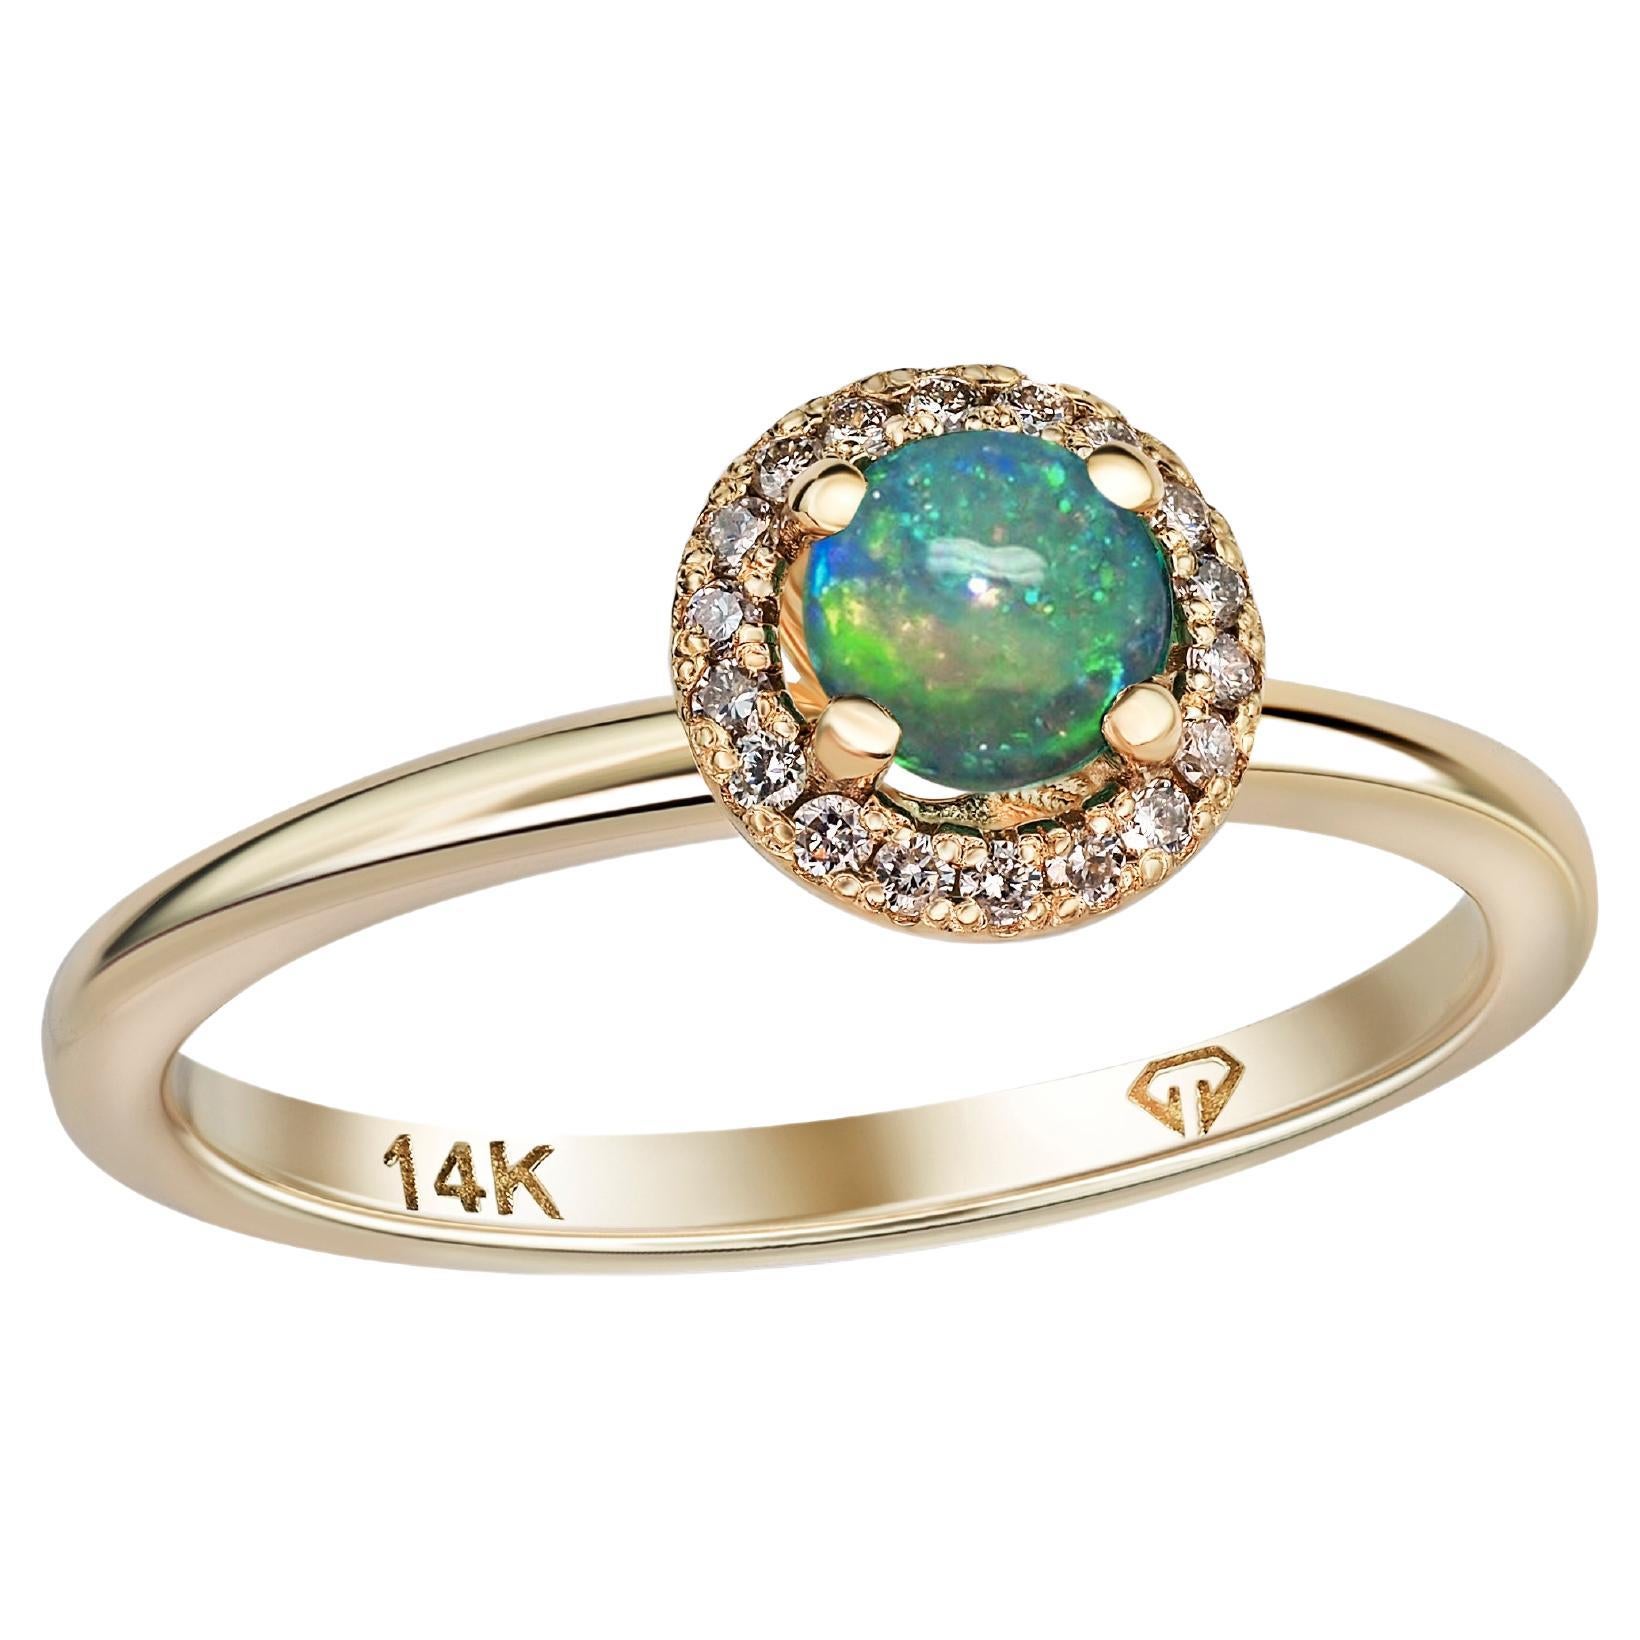 For Sale:  Opal and Diamonds 14k Gold Ring. Round Halo Opal Gold Ring!